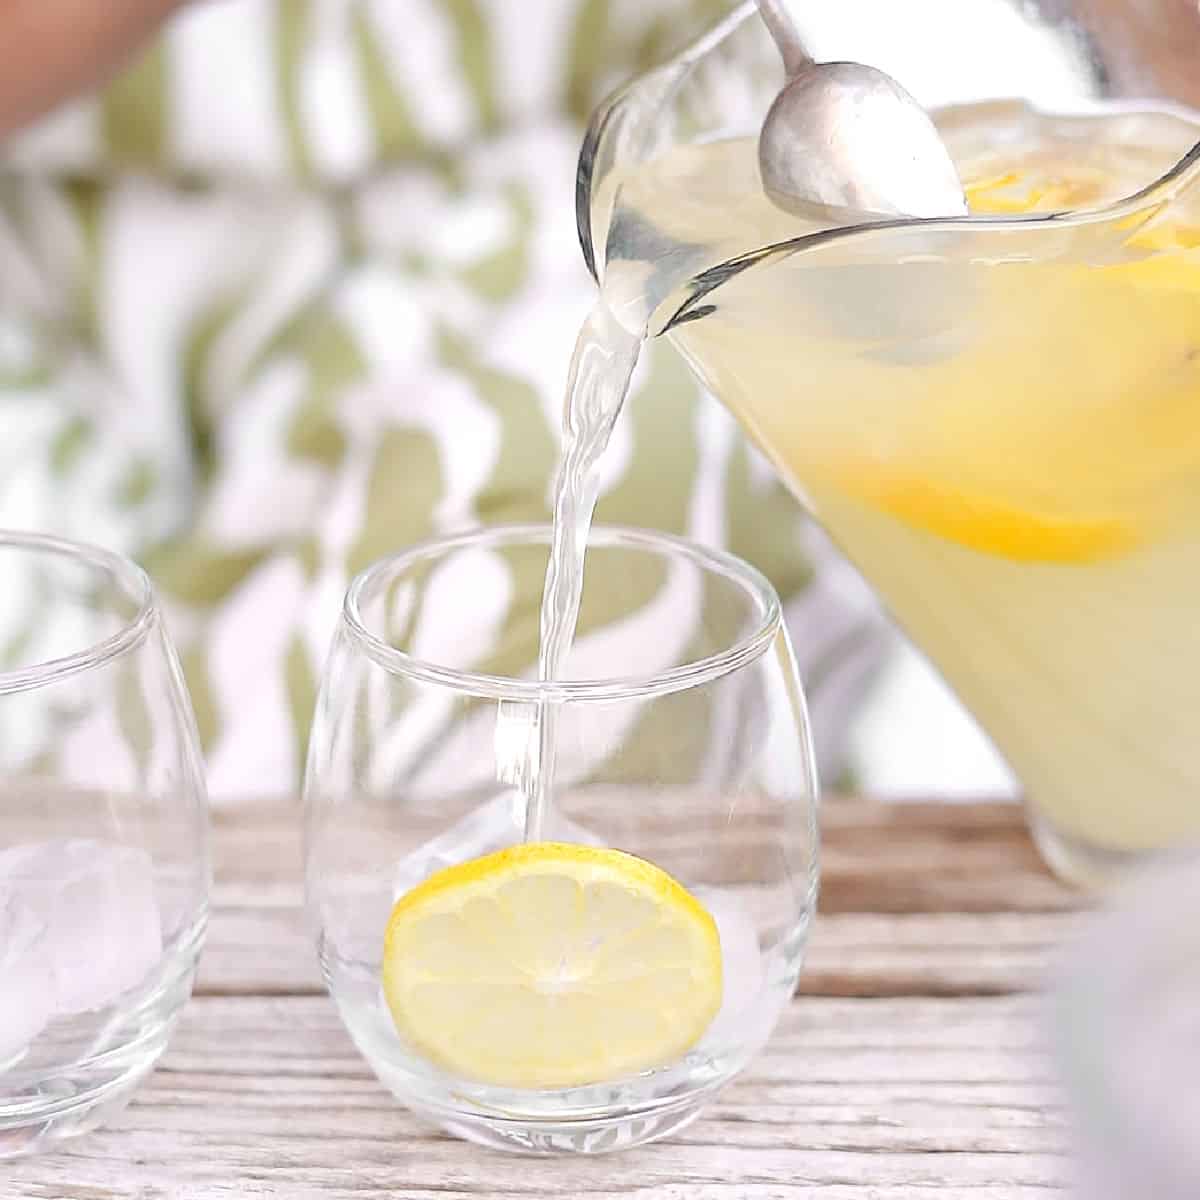 Serving lemonade from a jar into a glass with lemon slices. Wooden table. Green and white background.